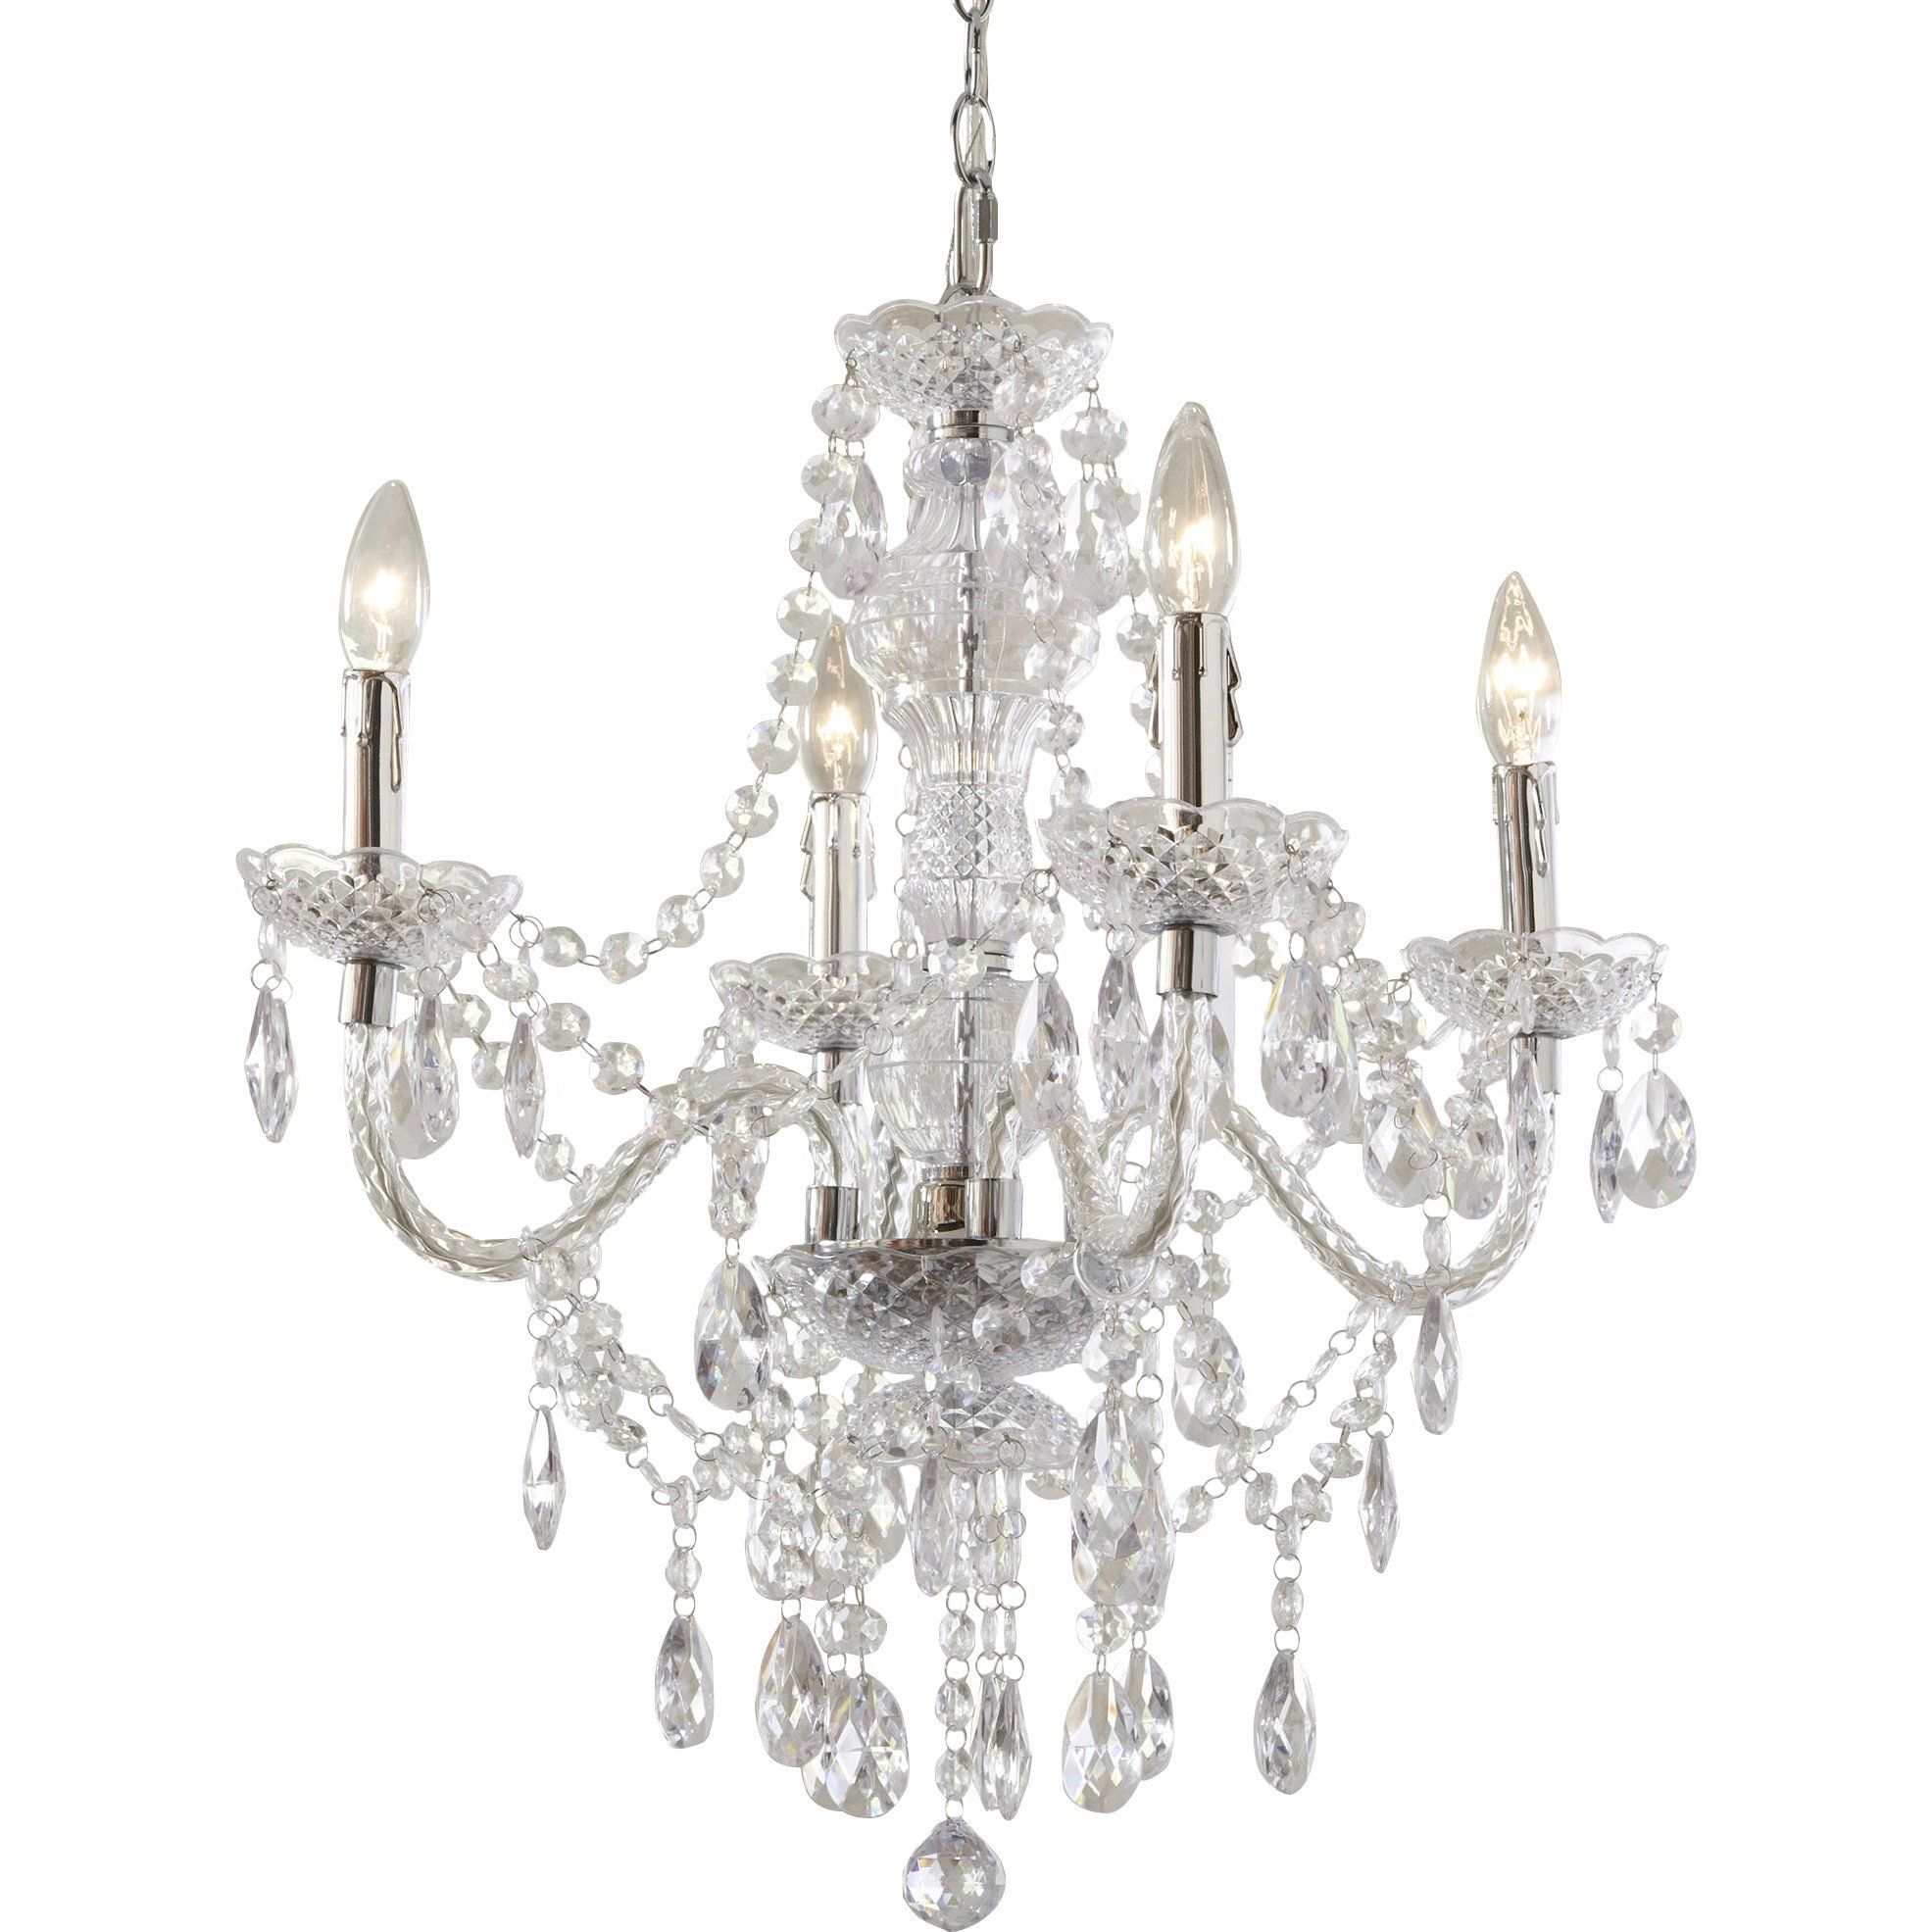 Ice Palace 4 Light Crystal Chandelier | Light Fixture Pertaining To Blanchette 5 Light Candle Style Chandeliers (View 14 of 30)